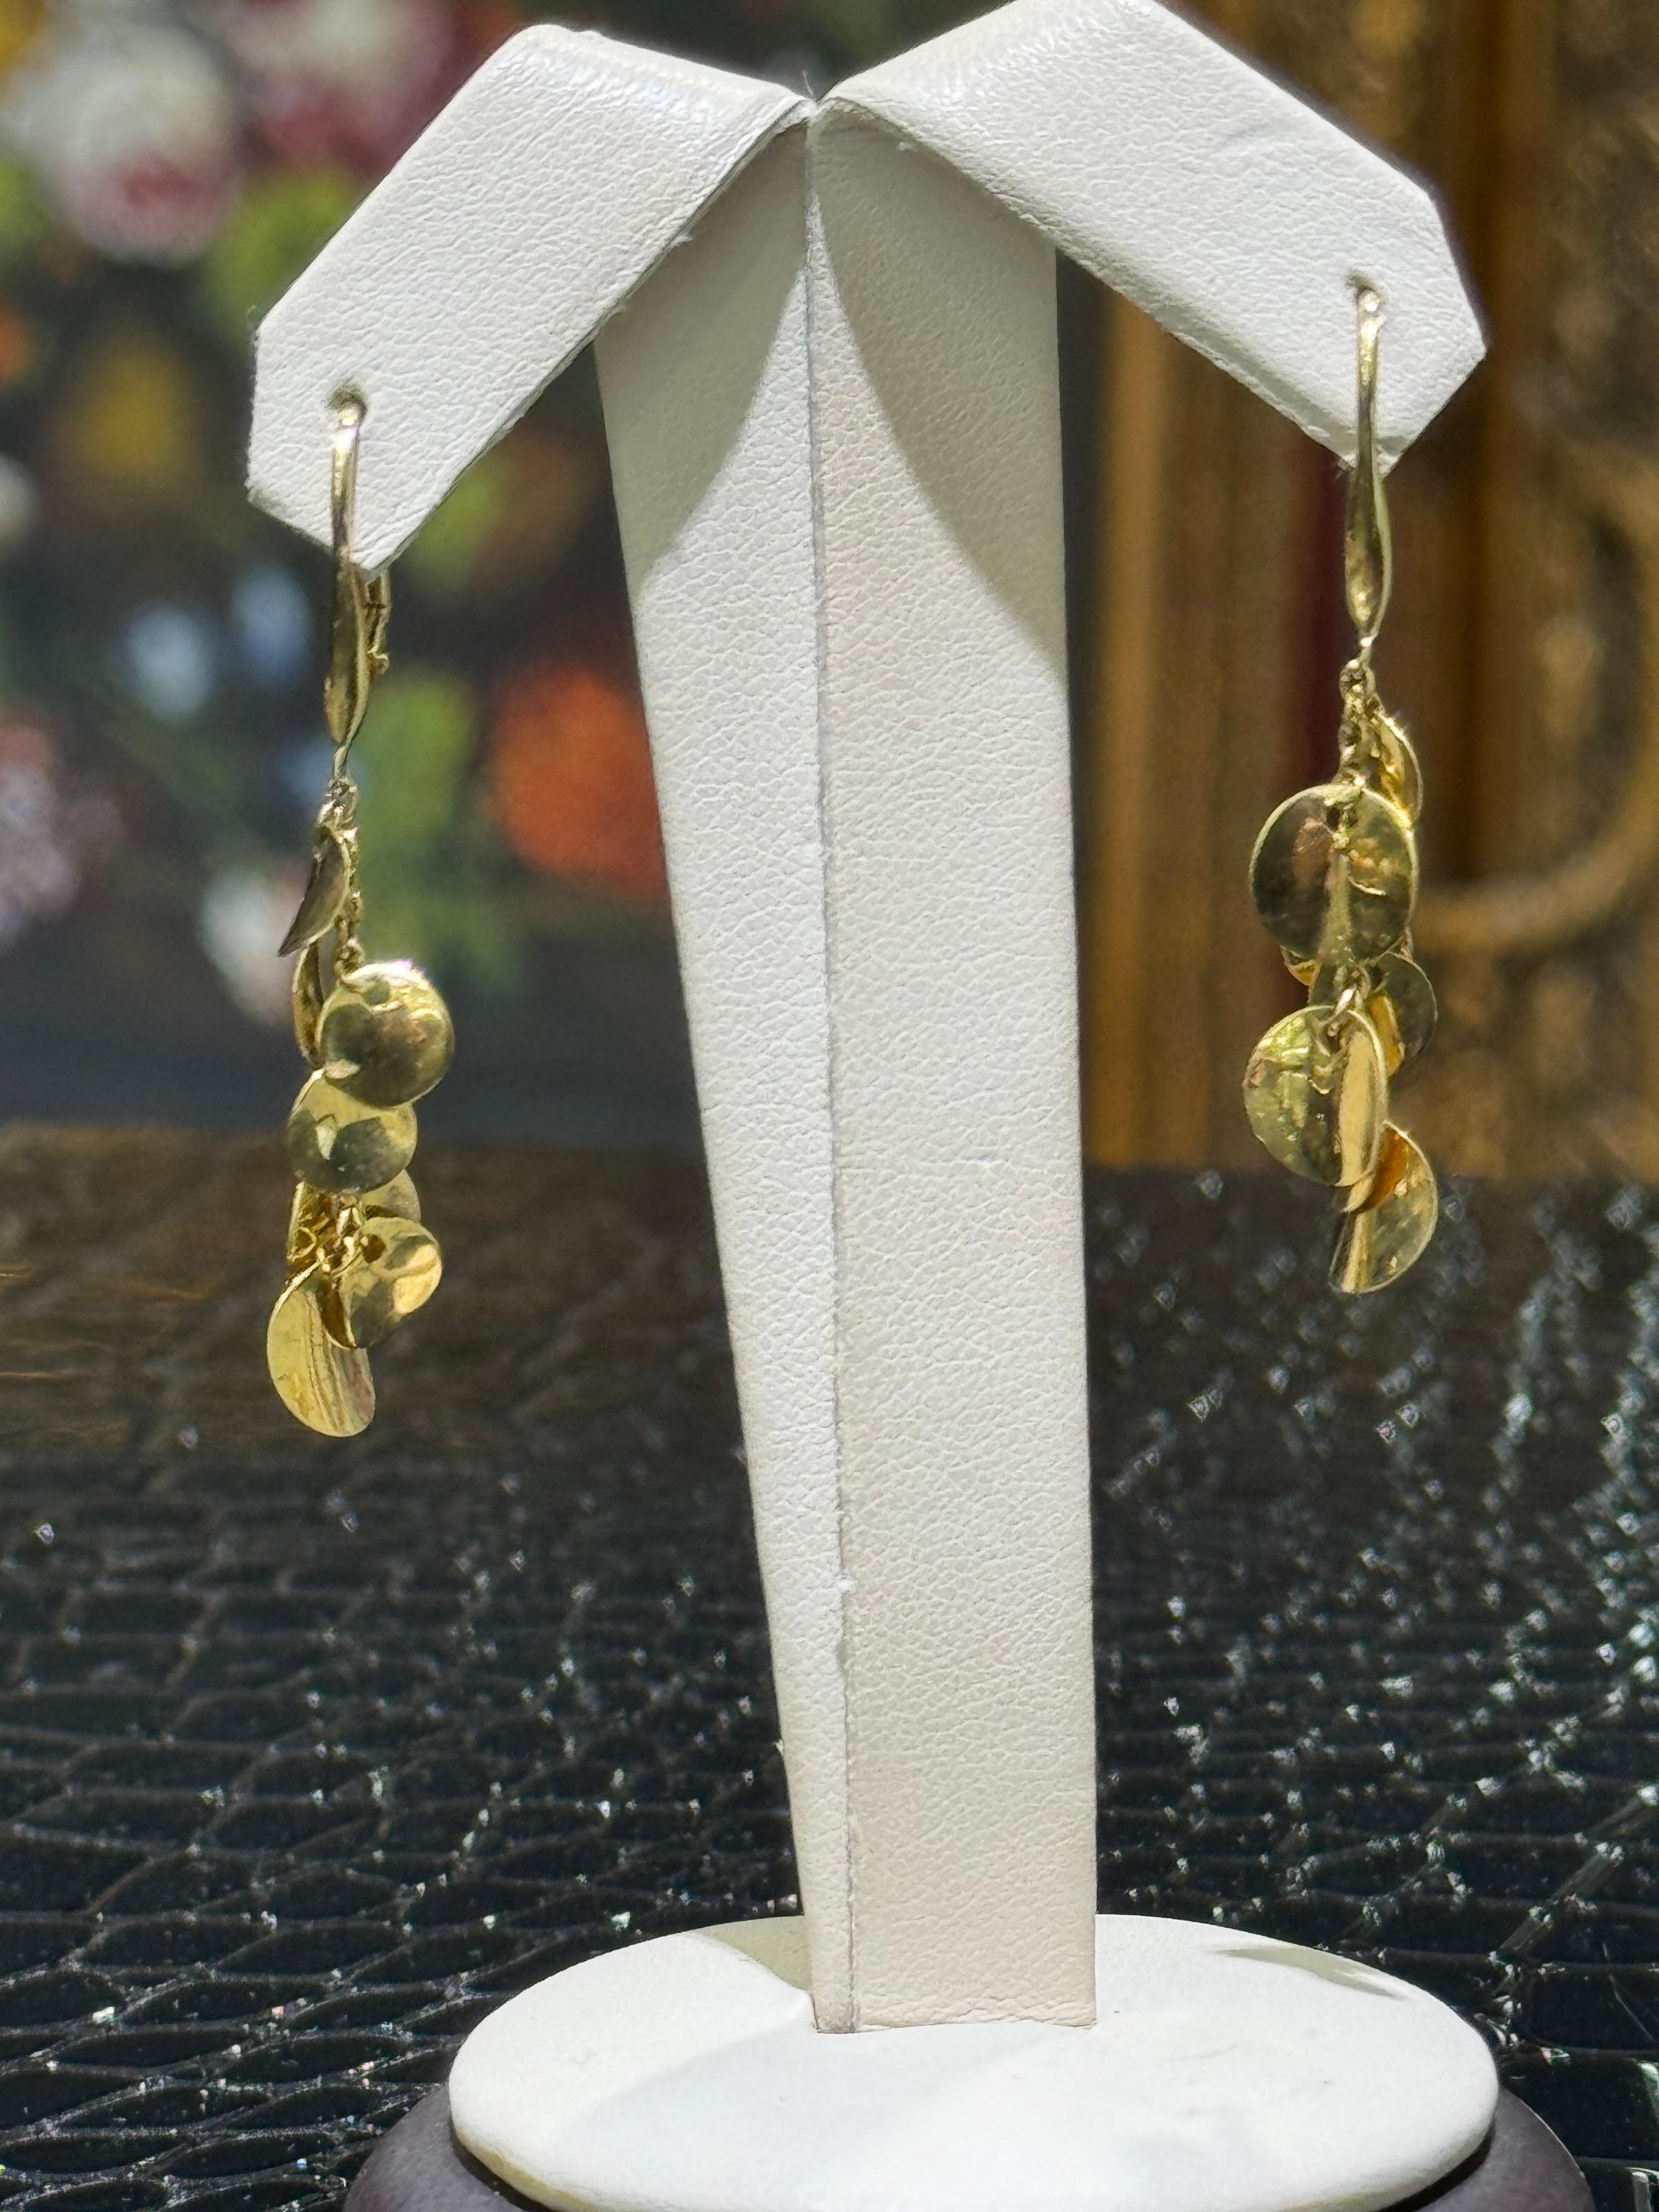 14k Drop Earrings. Hanging length is 1 7/8”. Weight is 3.9 grams. New, no tags